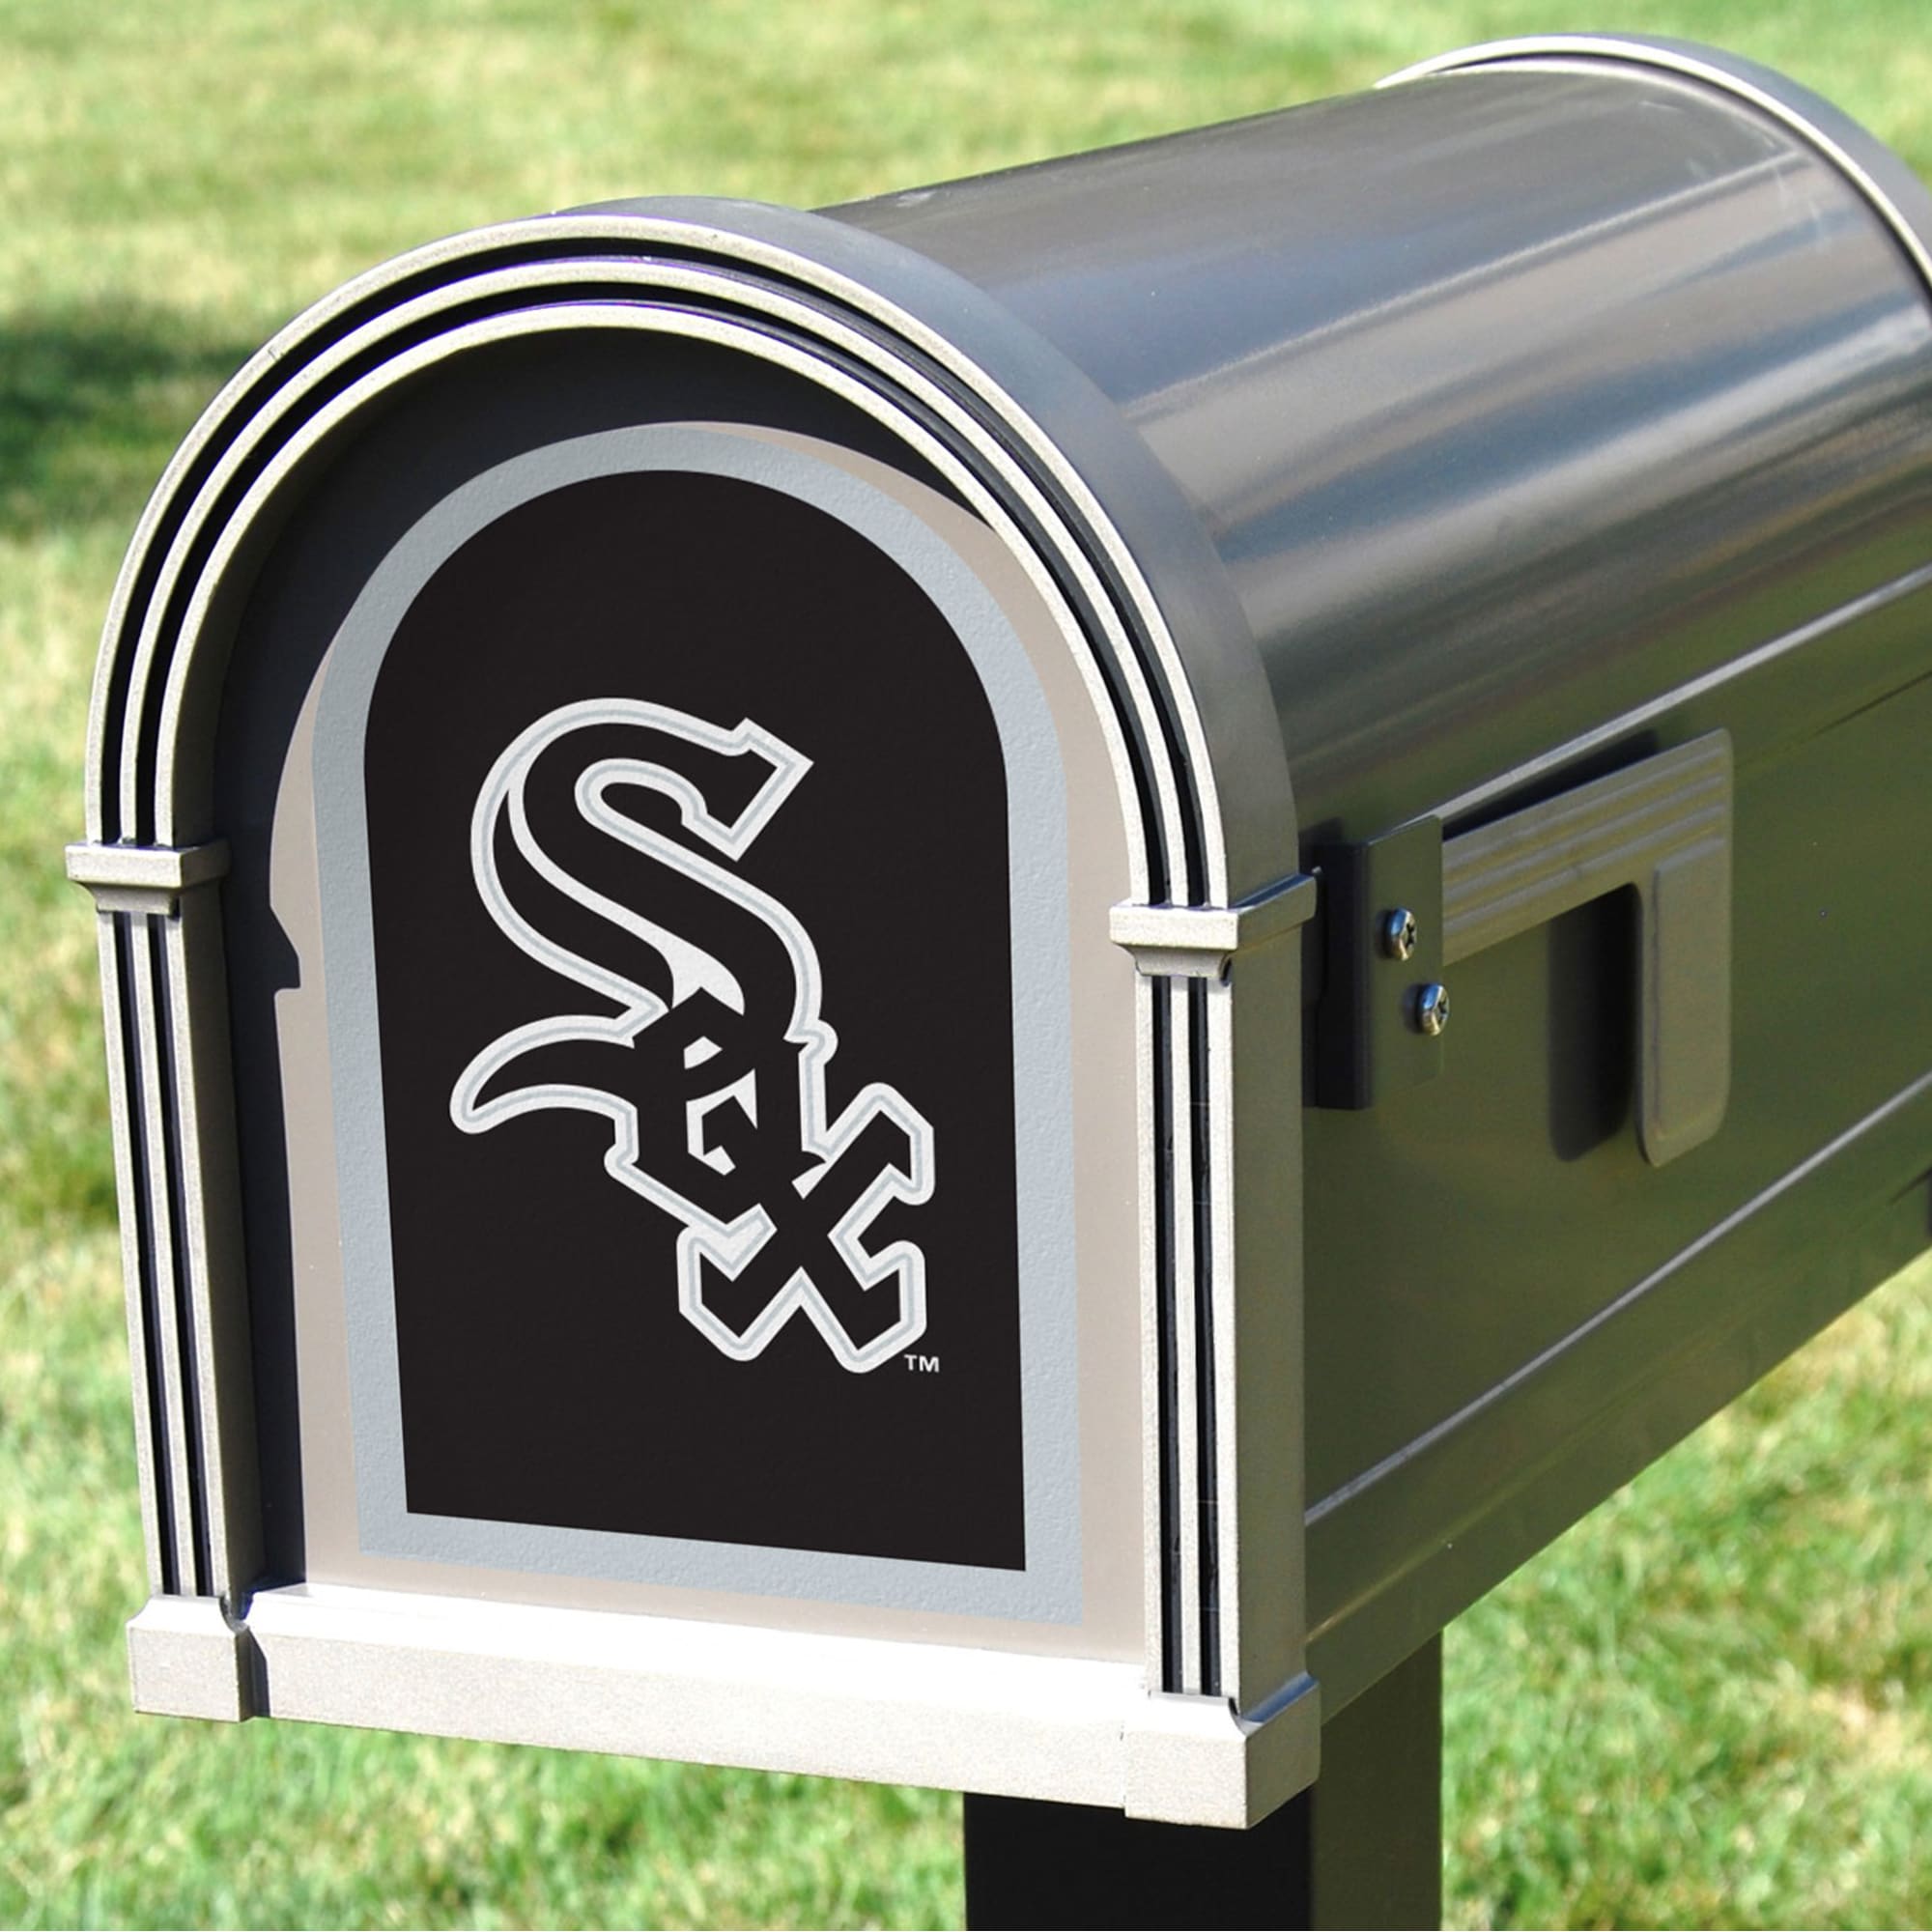 Chicago White Sox: Mailbox Logo - Officially Licensed MLB Outdoor Graphic 5.0"W x 8.0"H by Fathead | Wood/Aluminum